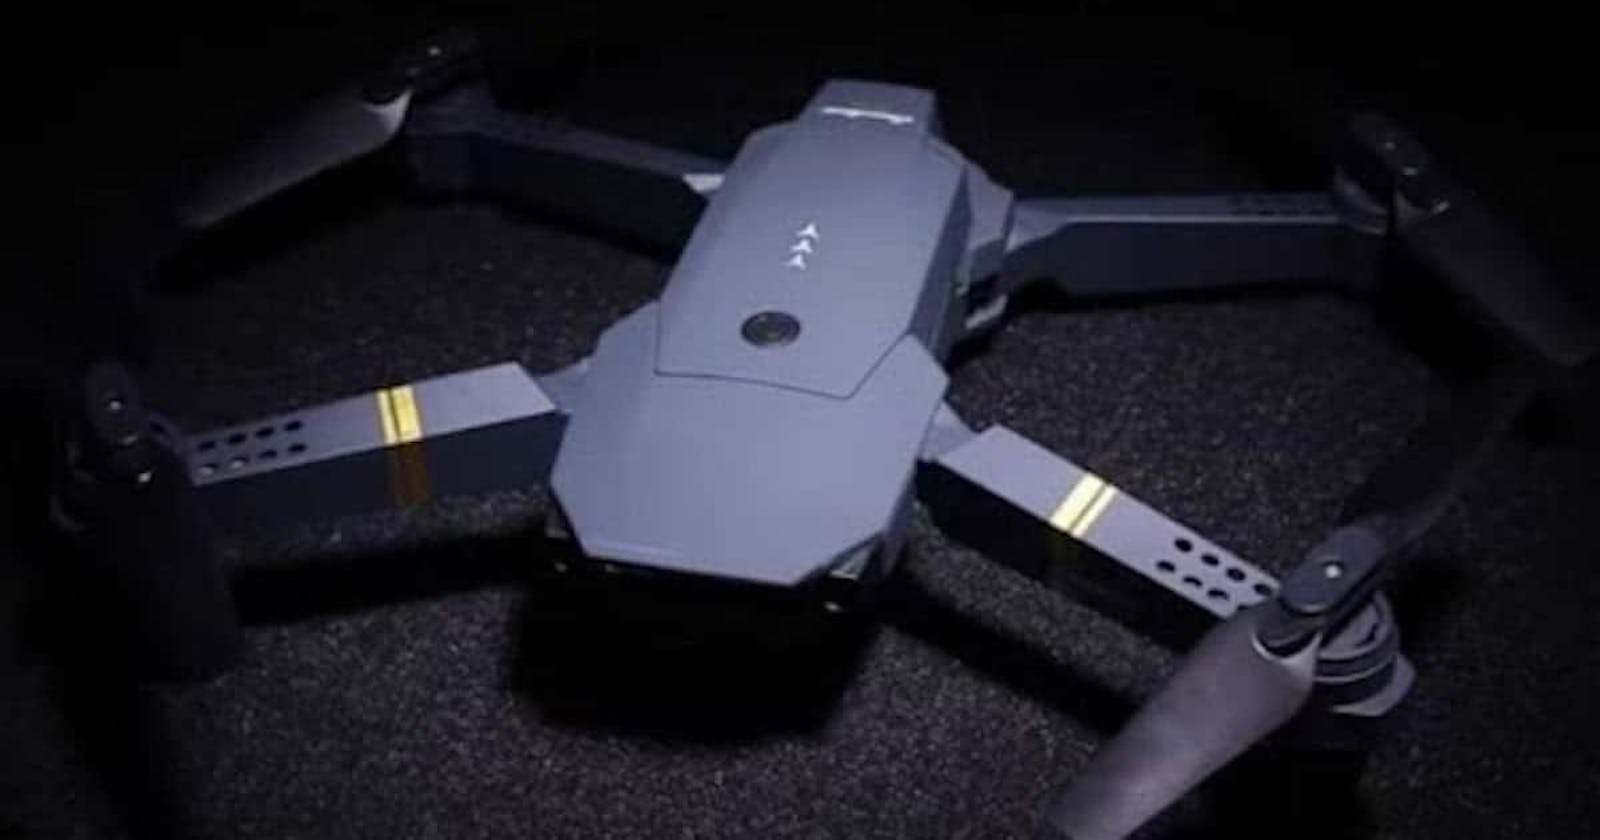 Black Falcon Drone Review: Is This Drone Any Good